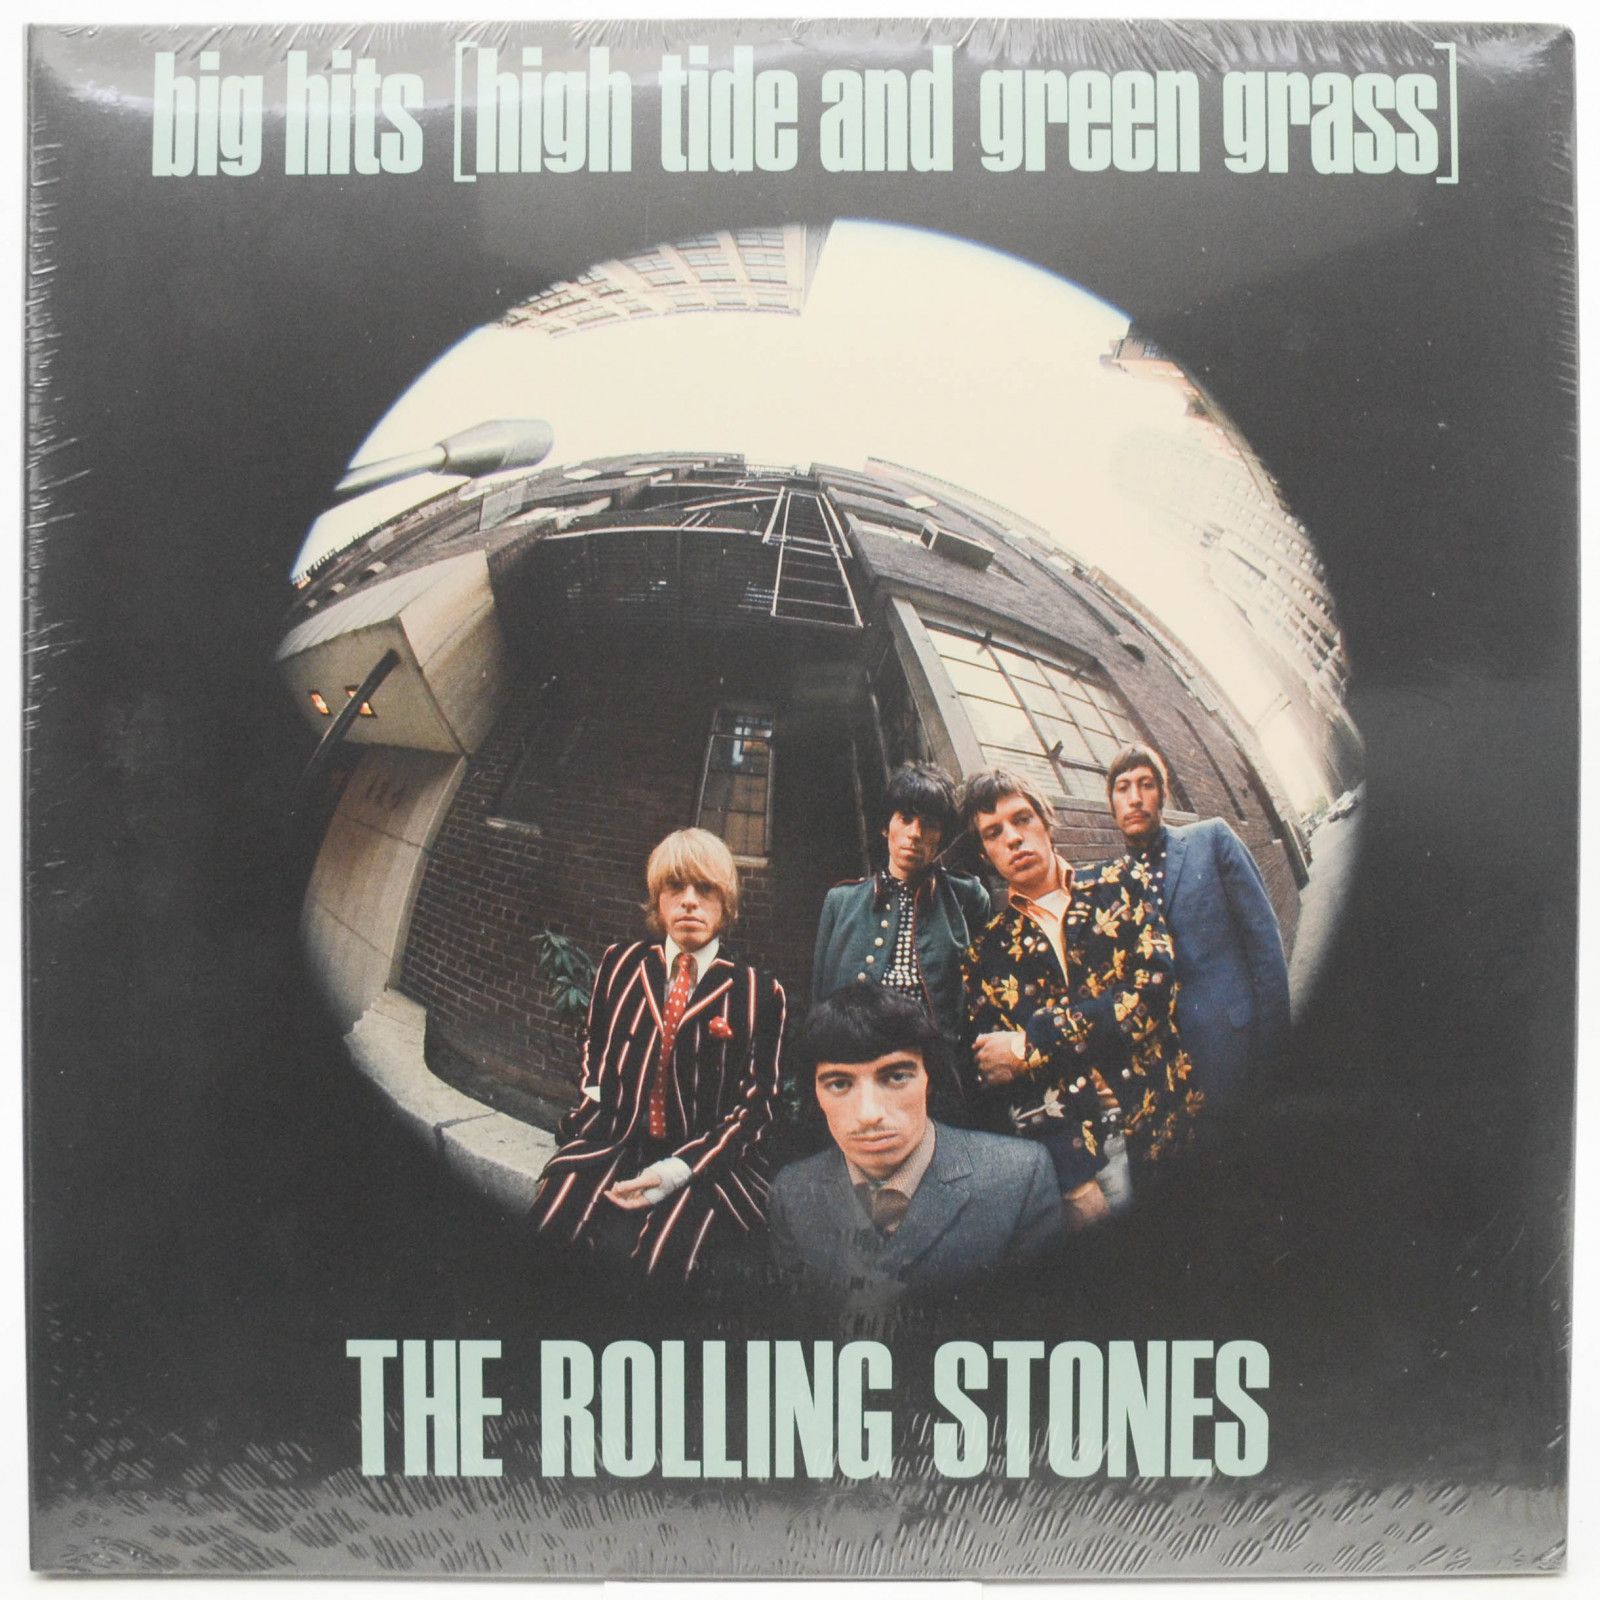 Rolling Stones — Big Hits [High Tide And Green Grass], 1966